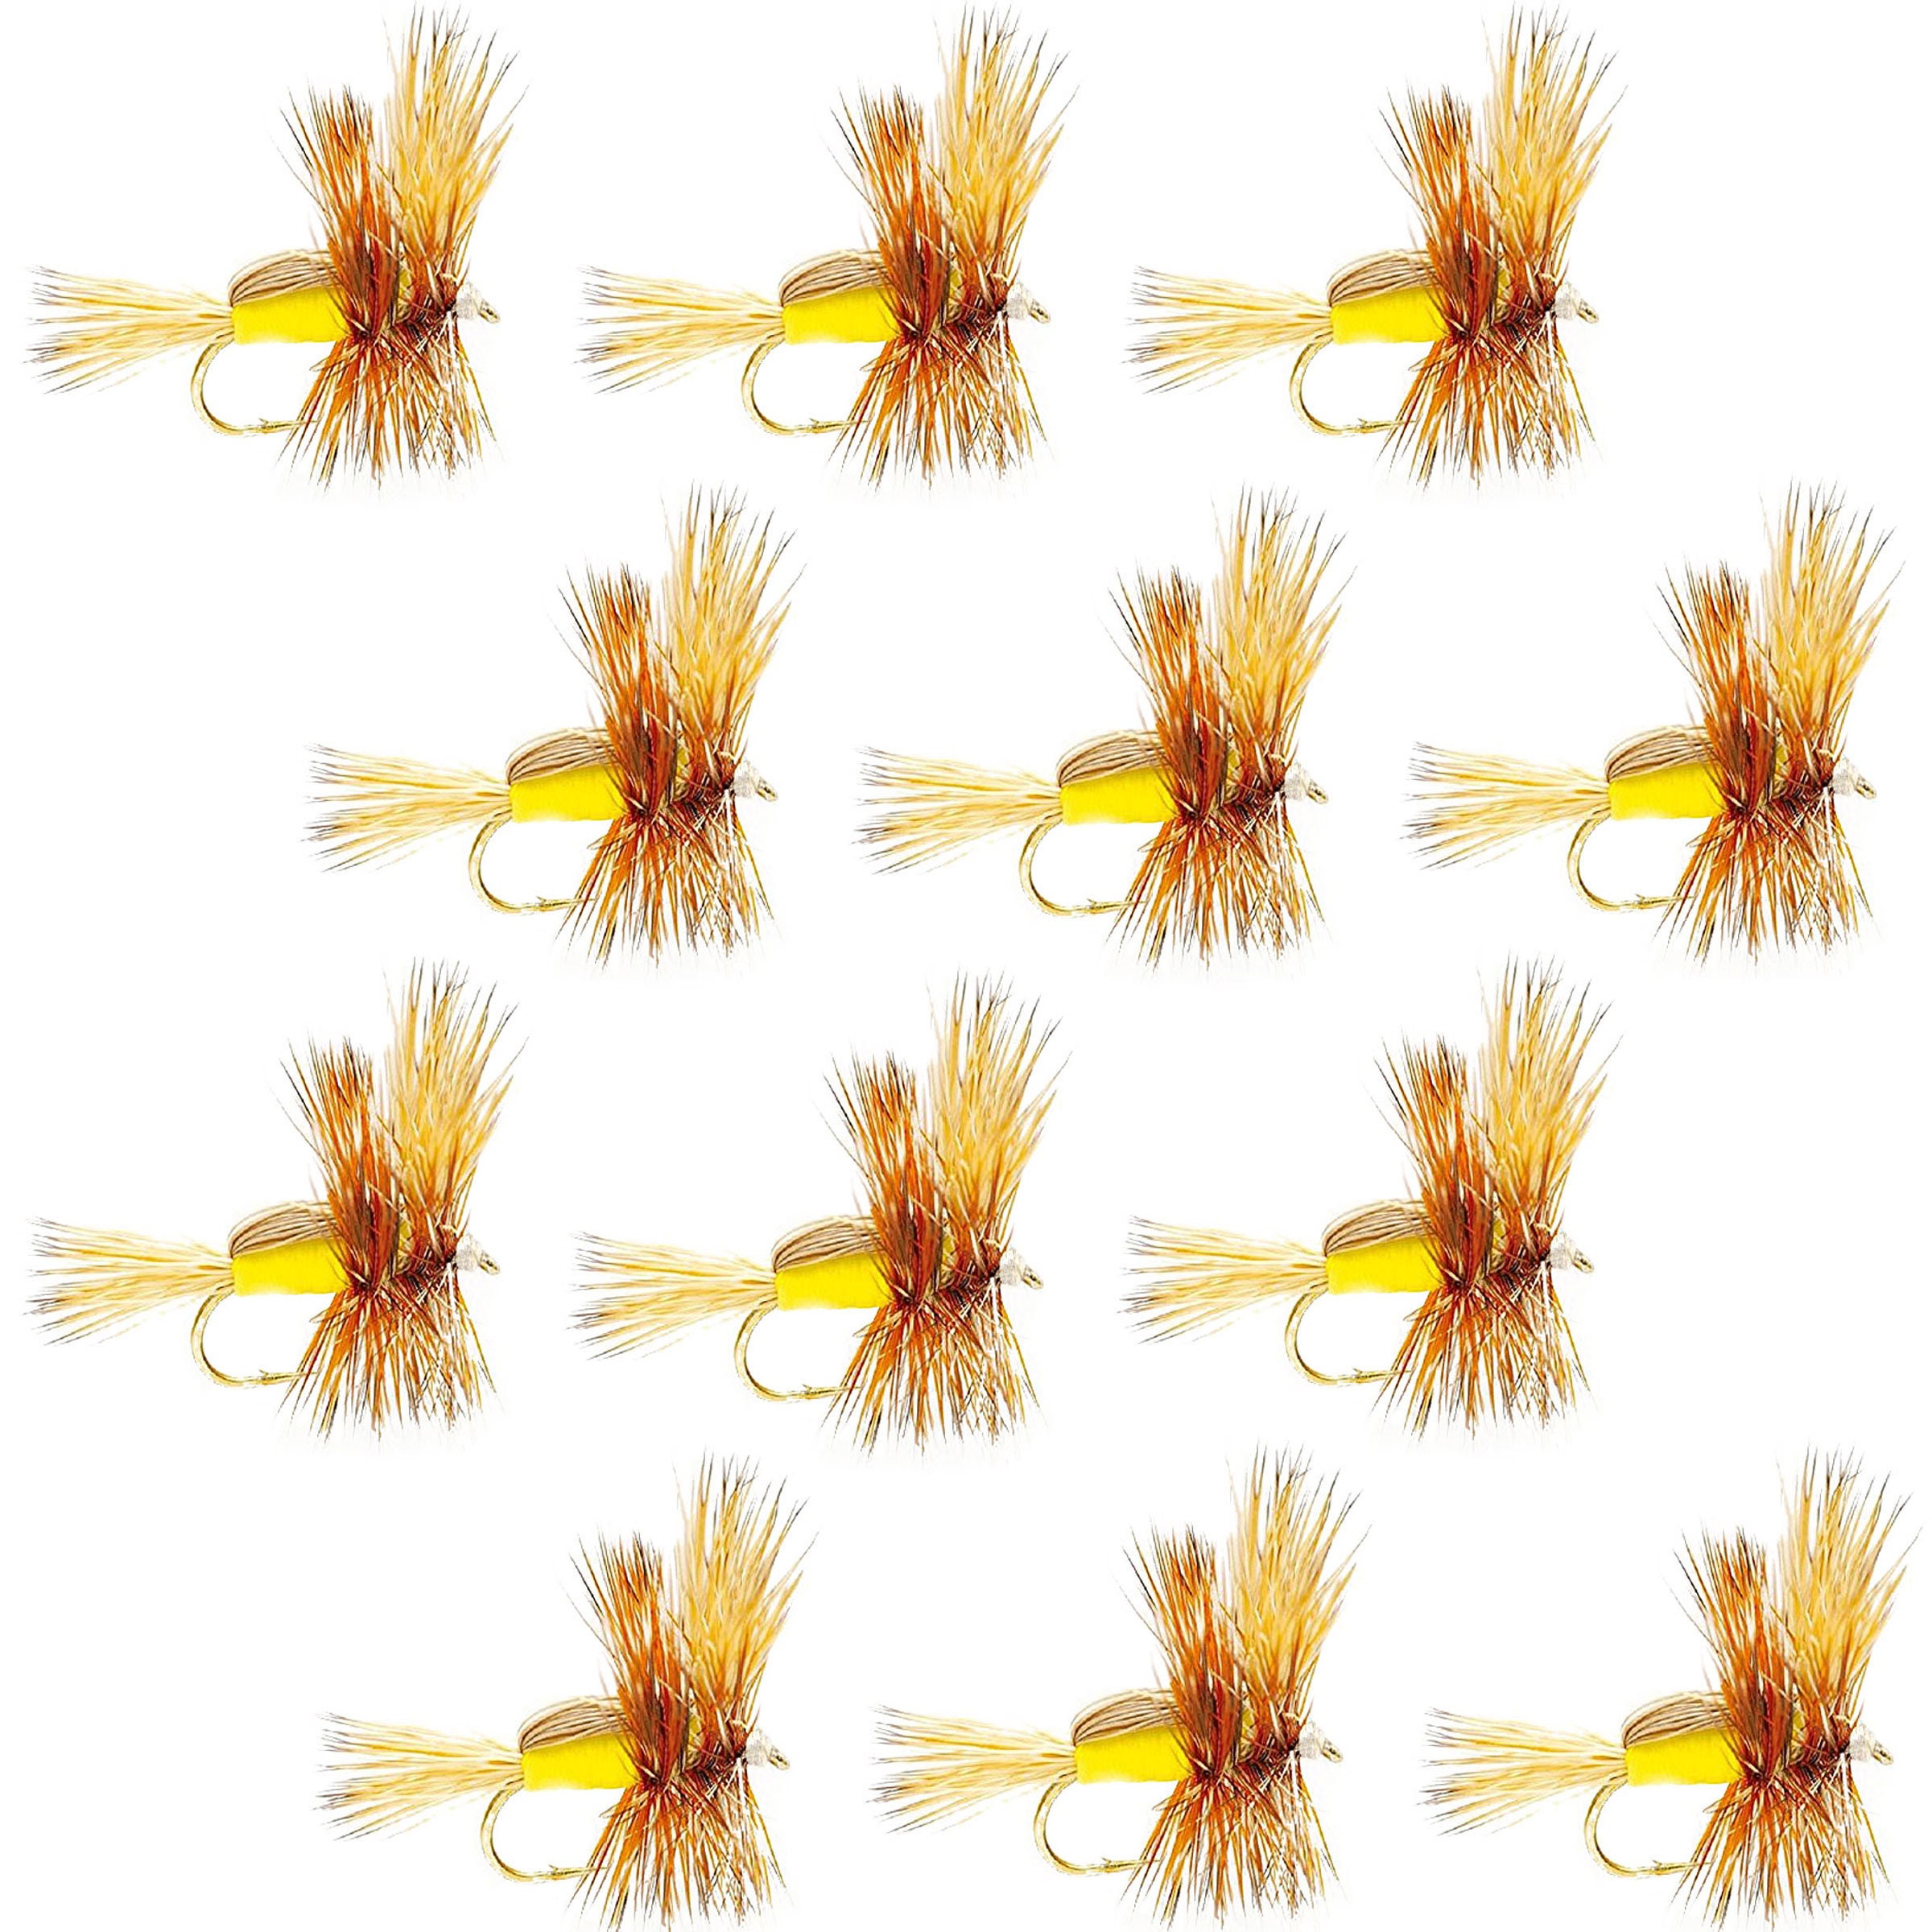 1 Dozen Yellow Humpy Classic Dry Fly Hand Tied Fly Fishing Trout Flies 